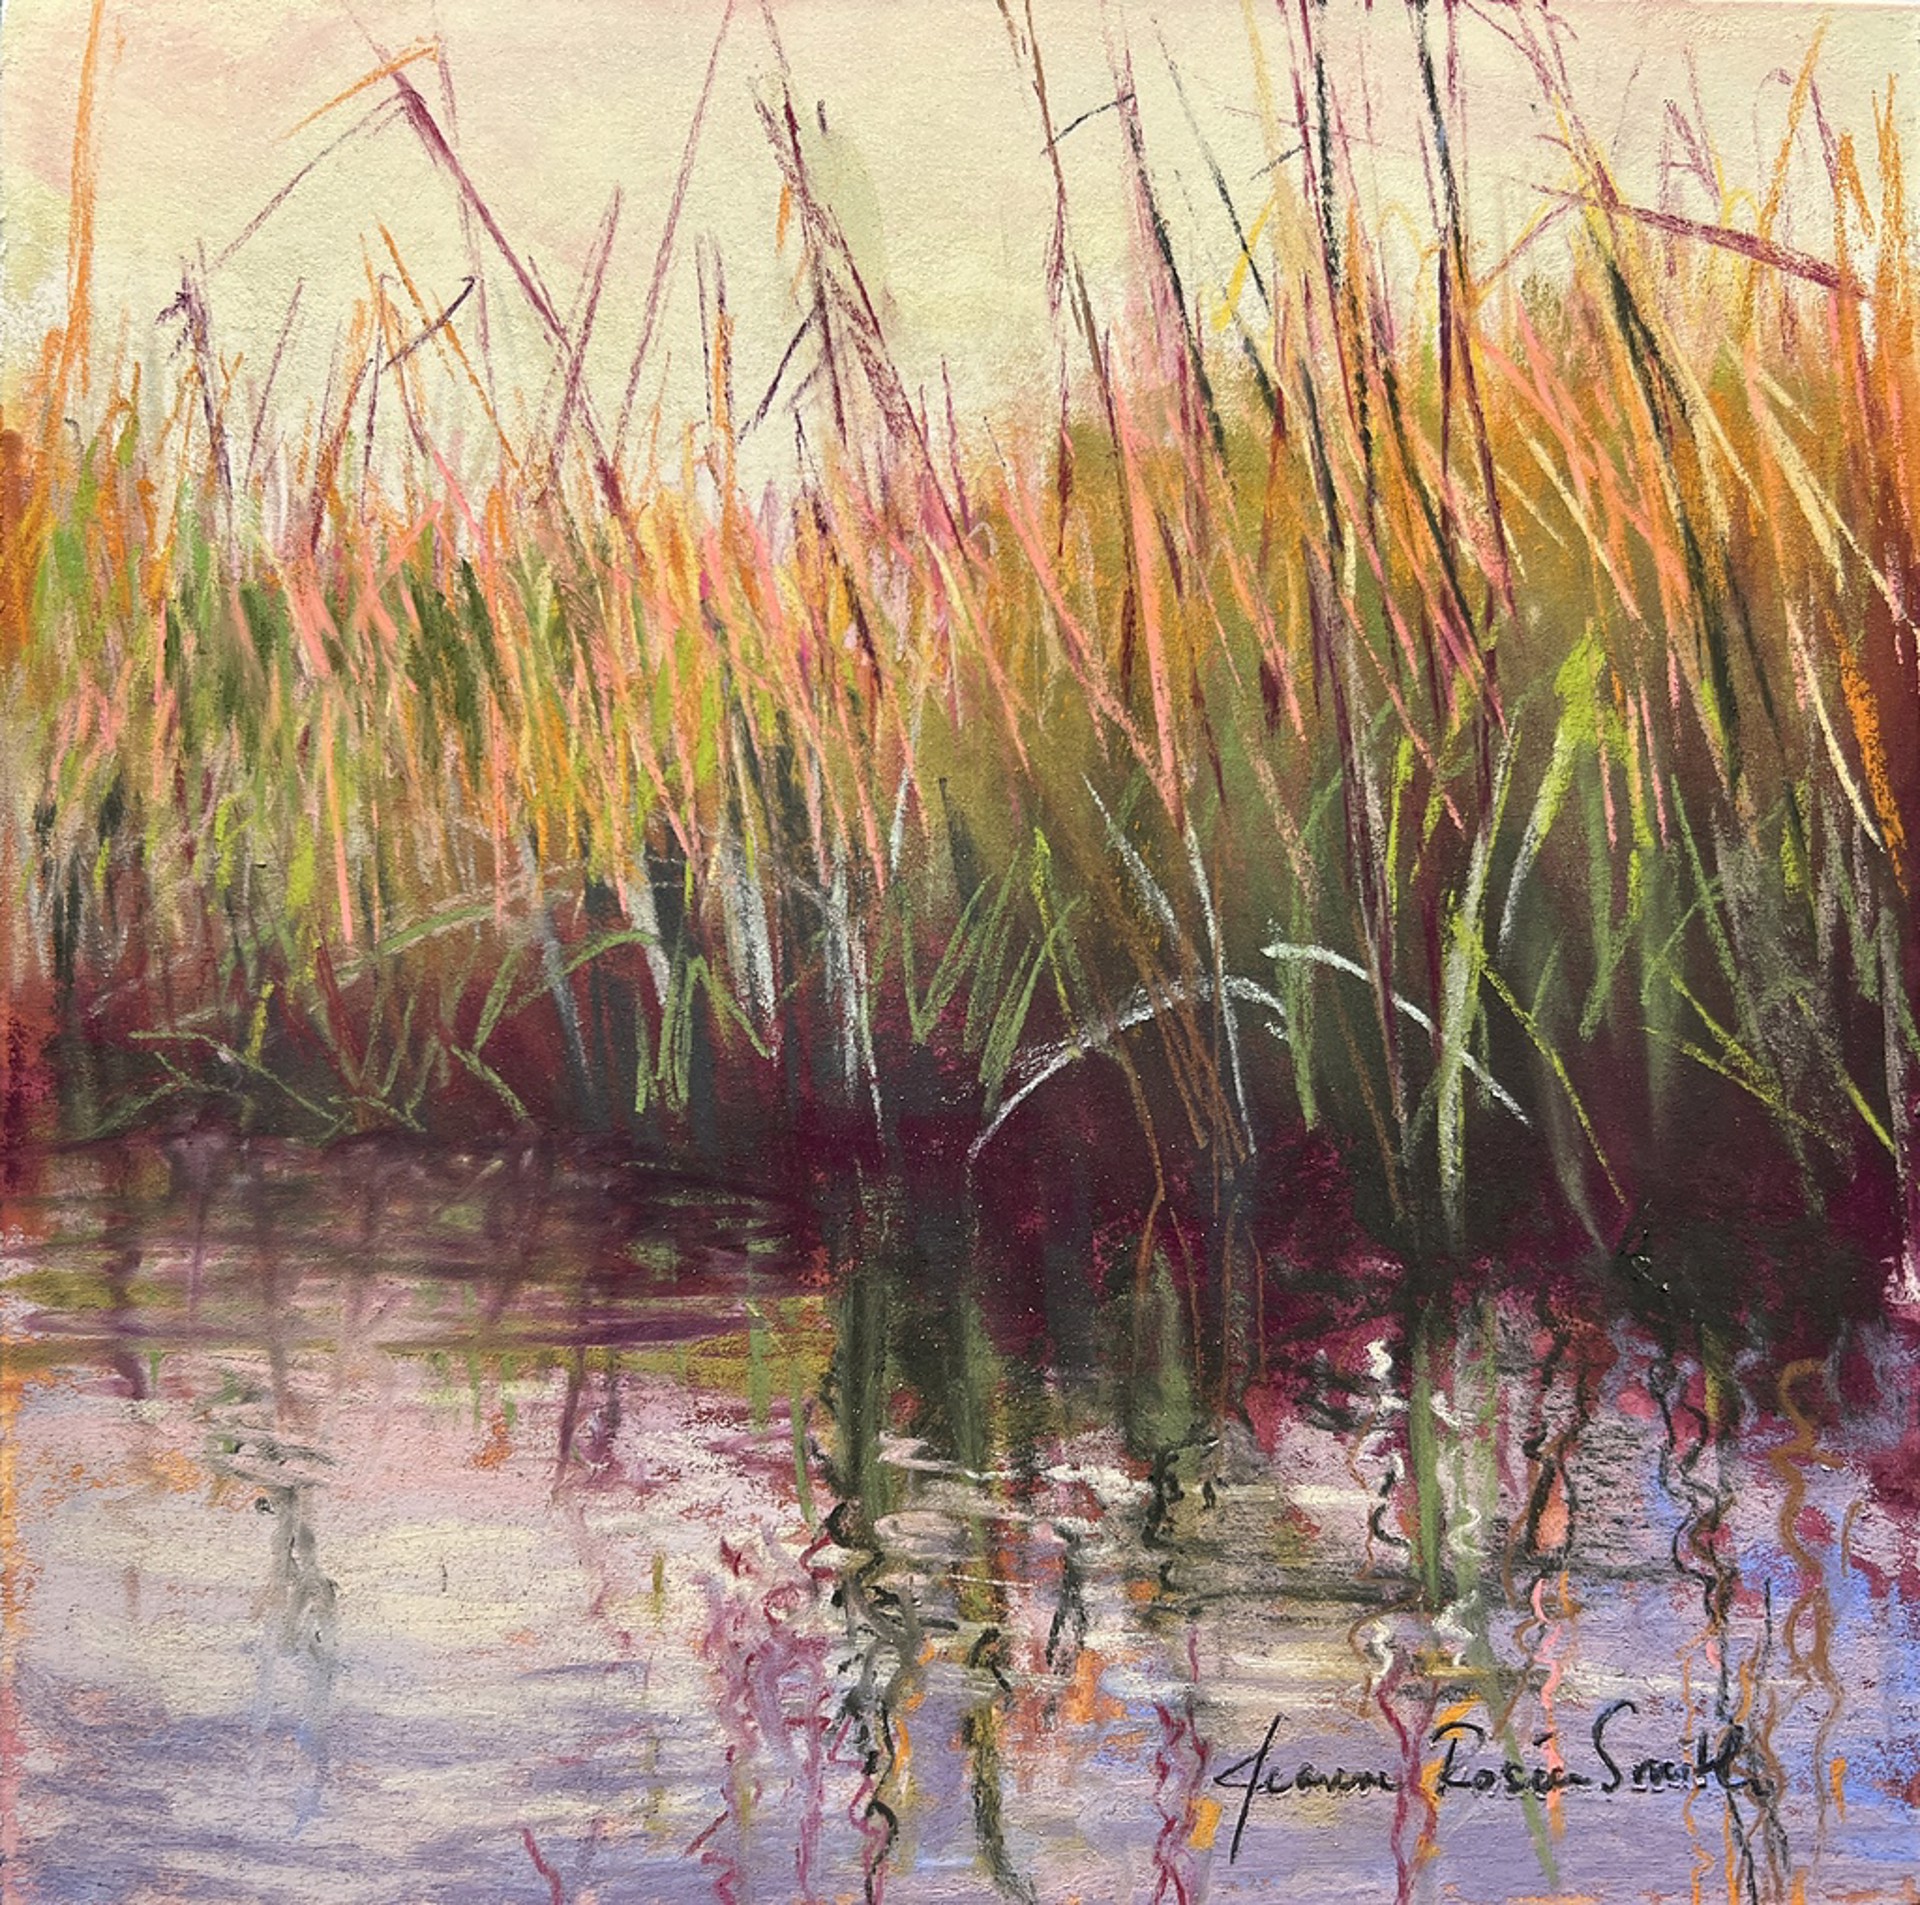 Golden Hour by JEANNE ROSIER SMITH